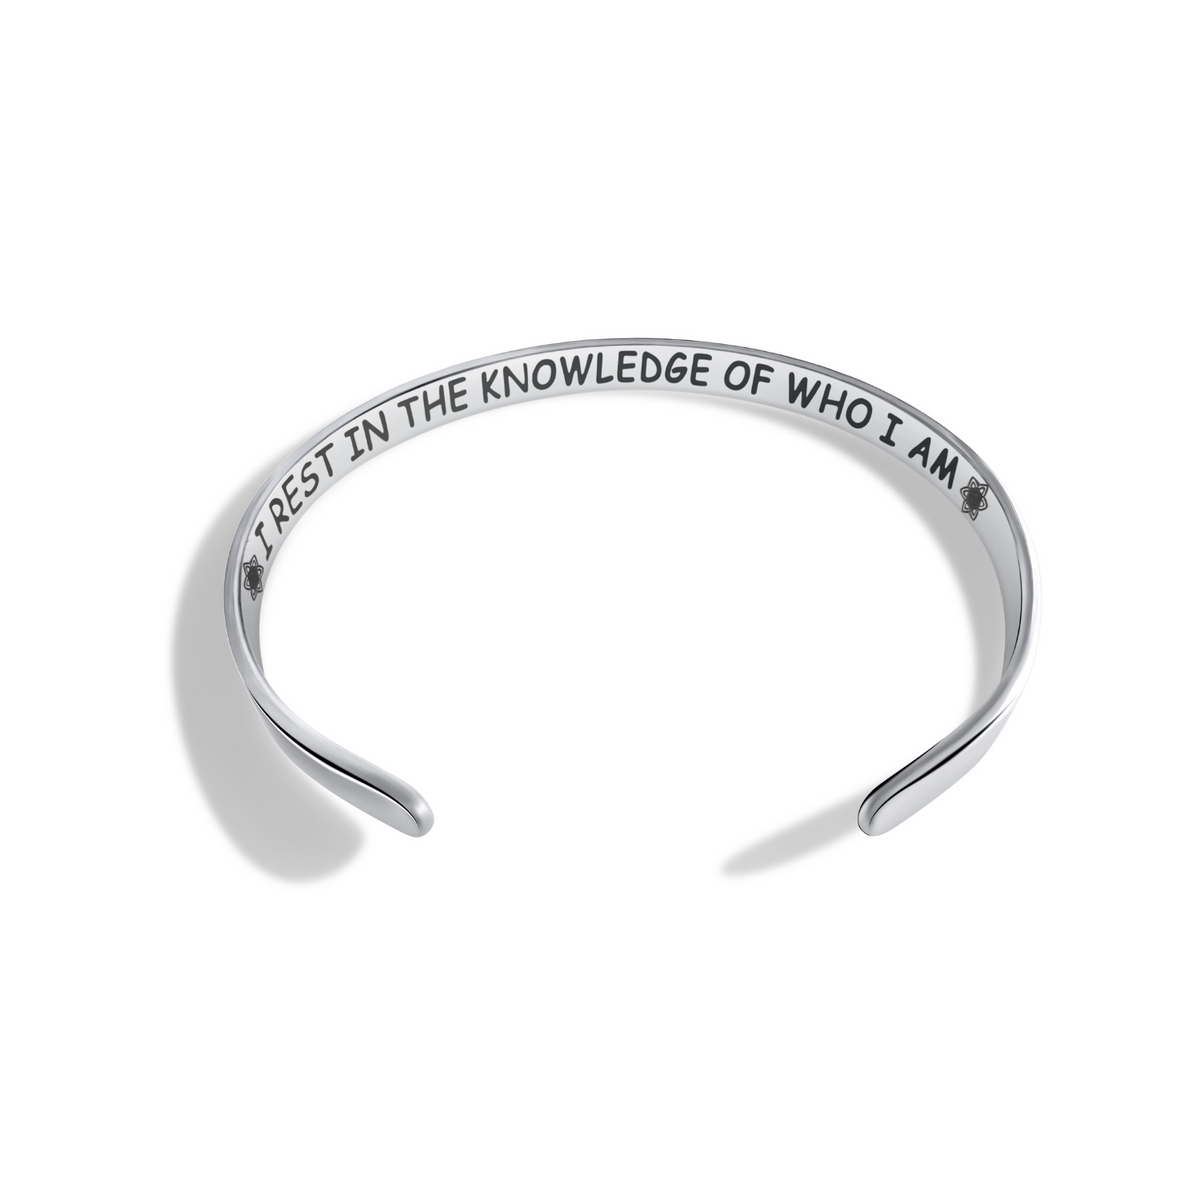 I Rest in the Knowledge of Who I Am (Mantra Cuff)